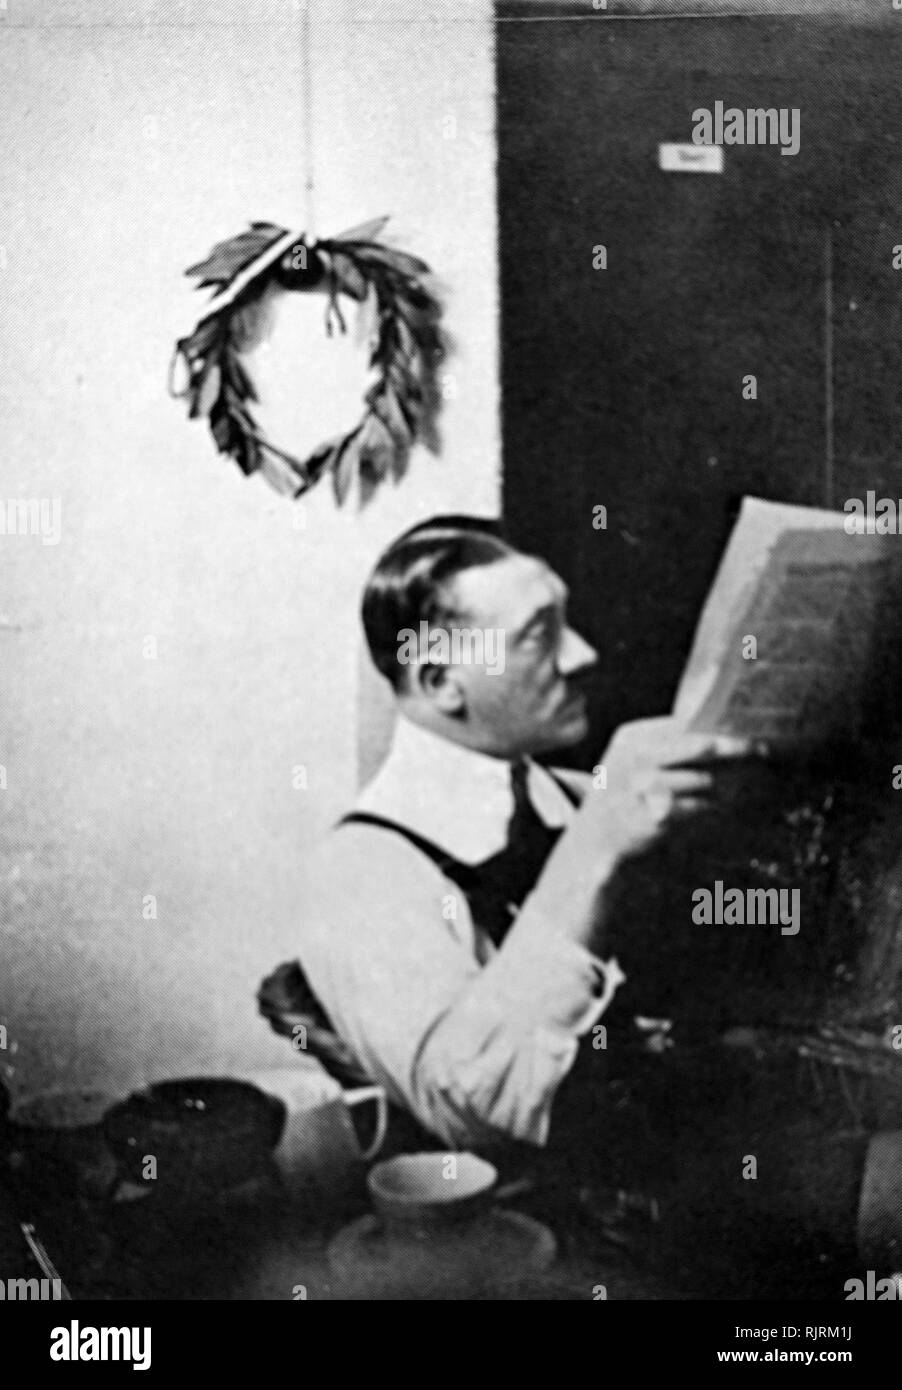 Adolf Hitler (1889 - 1945); German politician, demagogue. in prison at Landsburg 1923. leader of the Nazi Party (Nationalsozialistische Deutsche Arbeiterpartei; NSDAP), he rose to power in Germany as Chancellor in 1933 and Fuhrer ('Leader') in 1934. dictator of Nazi Germany from 1933 to 1945, Stock Photo